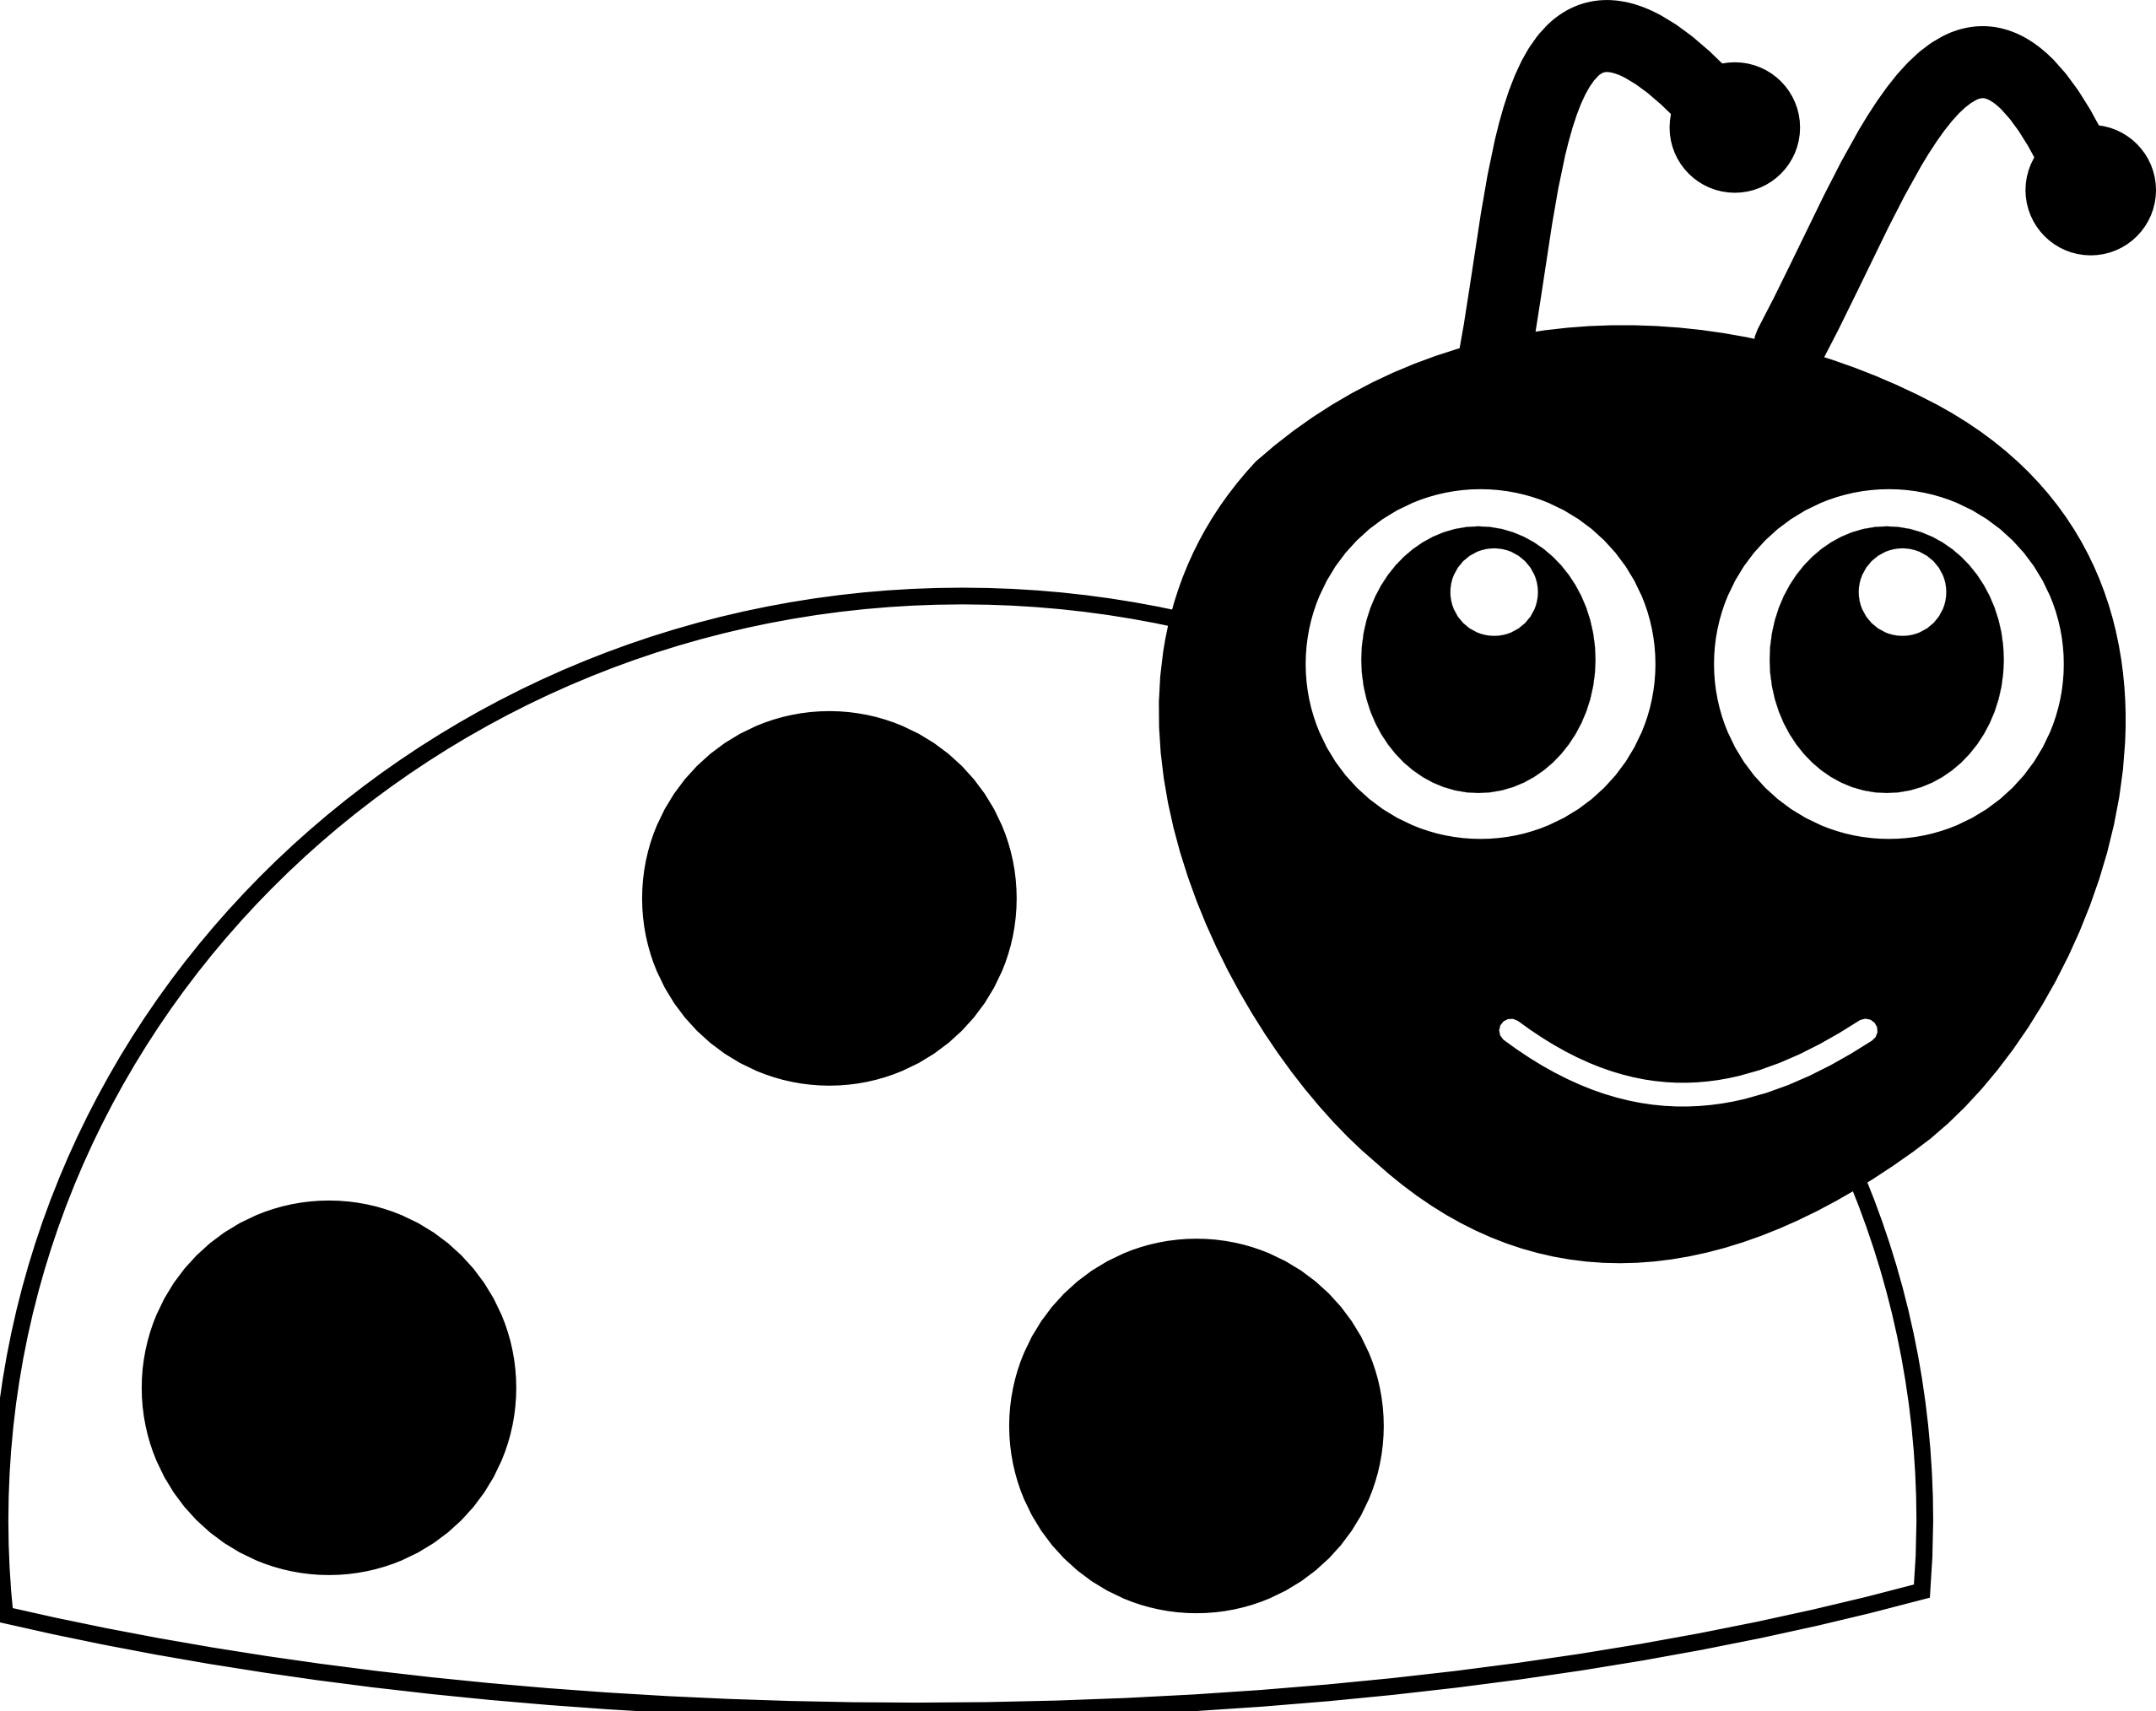 Black and white rideoebi. Fly clipart beetle